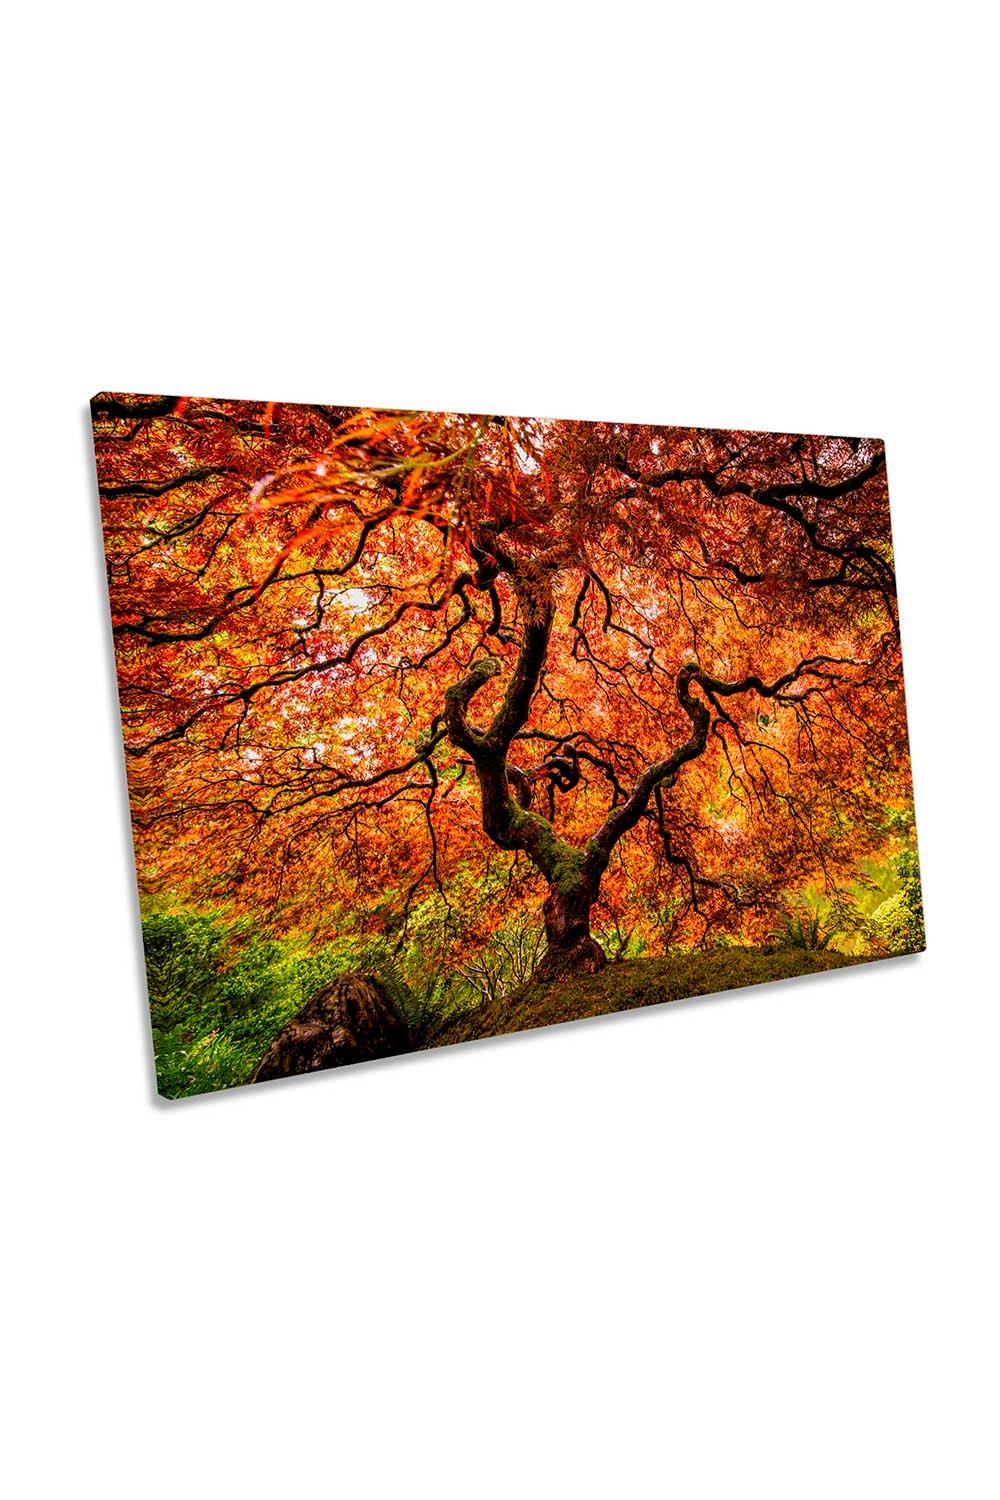 Maple Tree Asian Floral Autumn Canvas Wall Art Picture Print